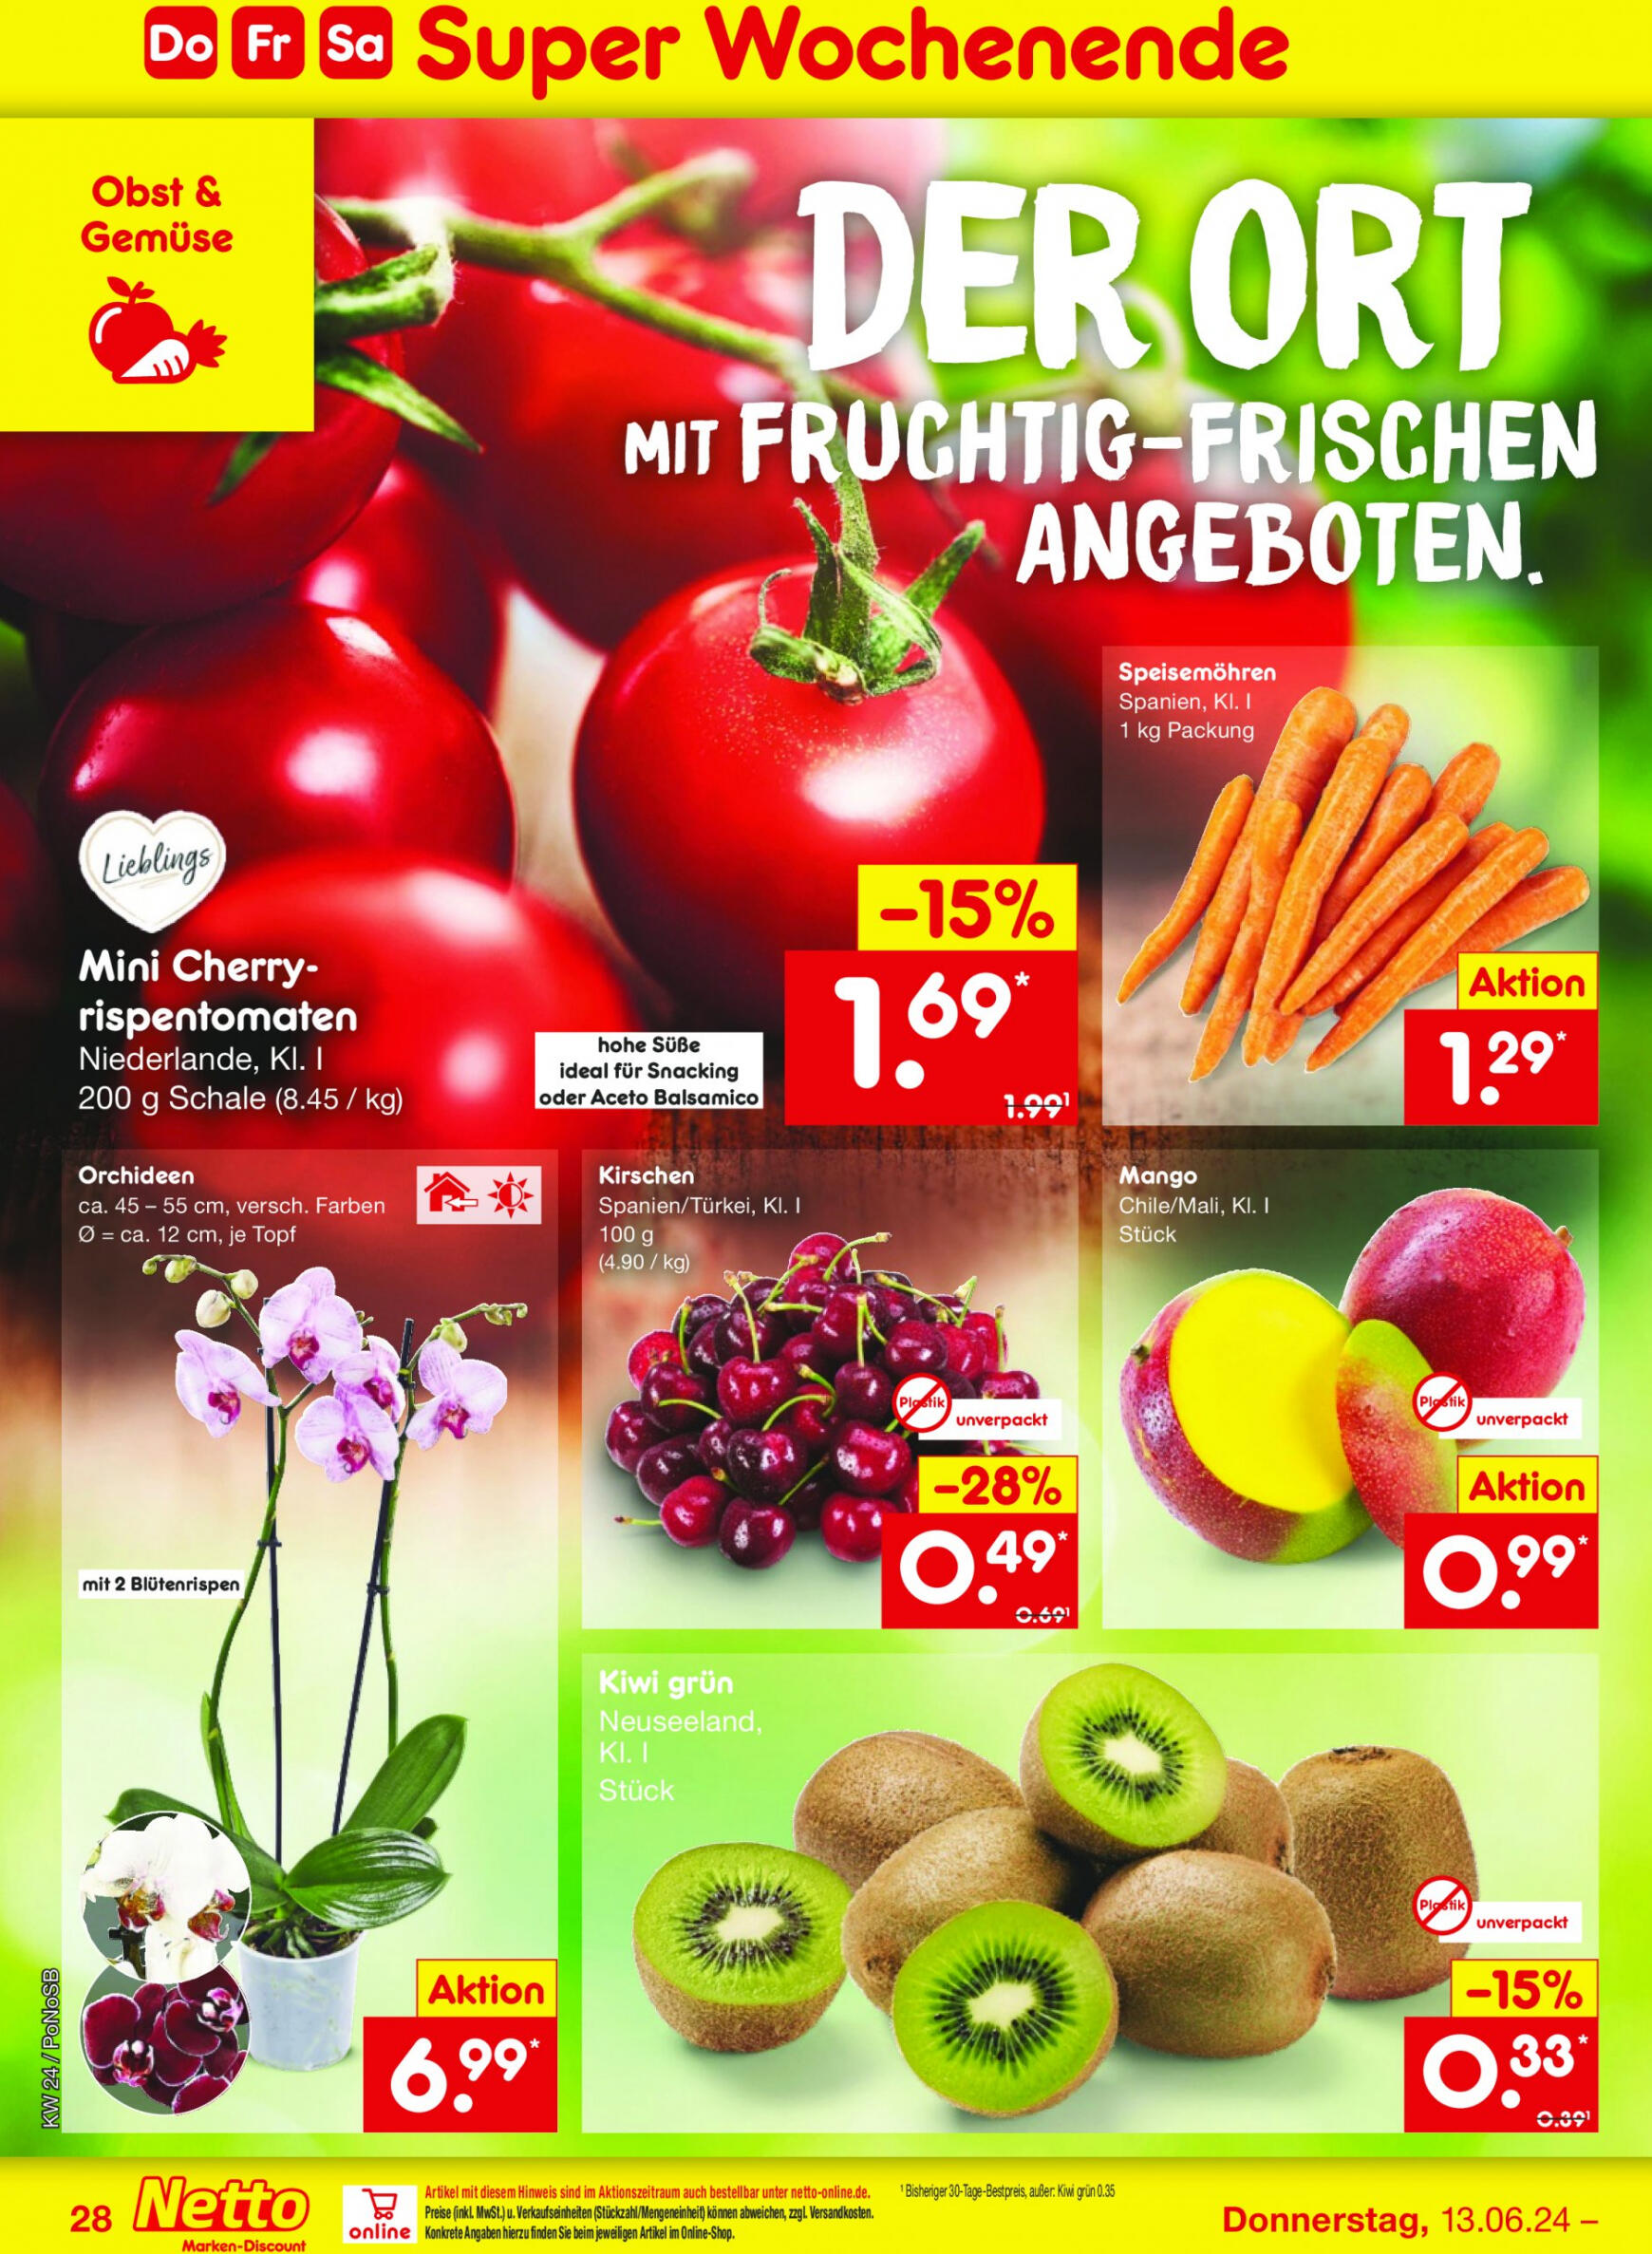 netto - Flyer Netto aktuell 10.06. - 15.06. - page: 44